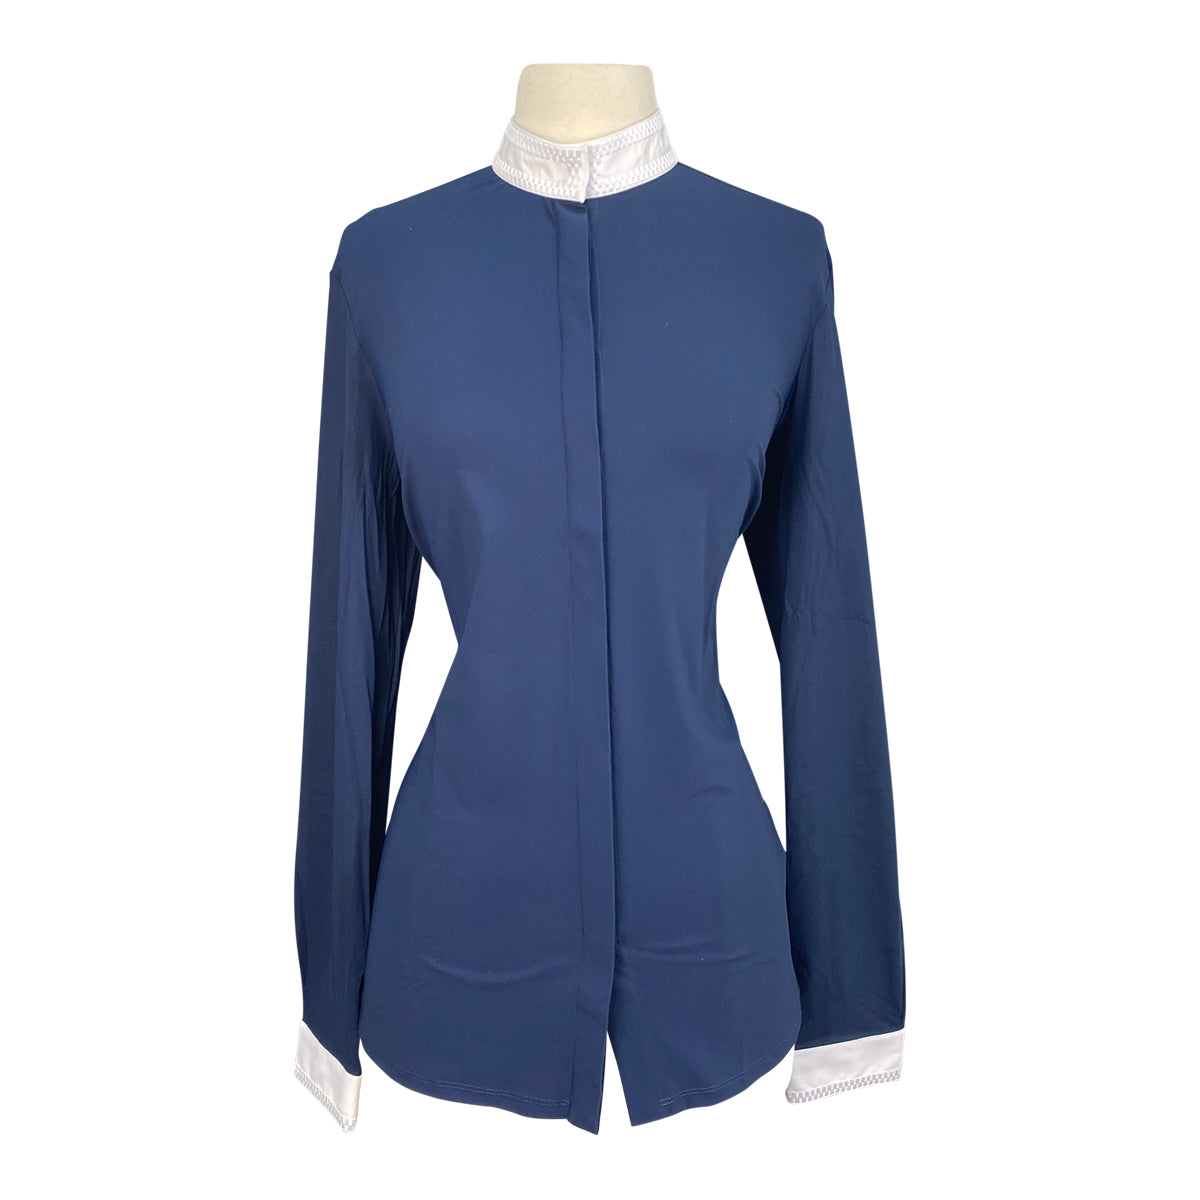 Cavalleria Toscana L/S Jersey Competition Shirt  in Ocean Blue